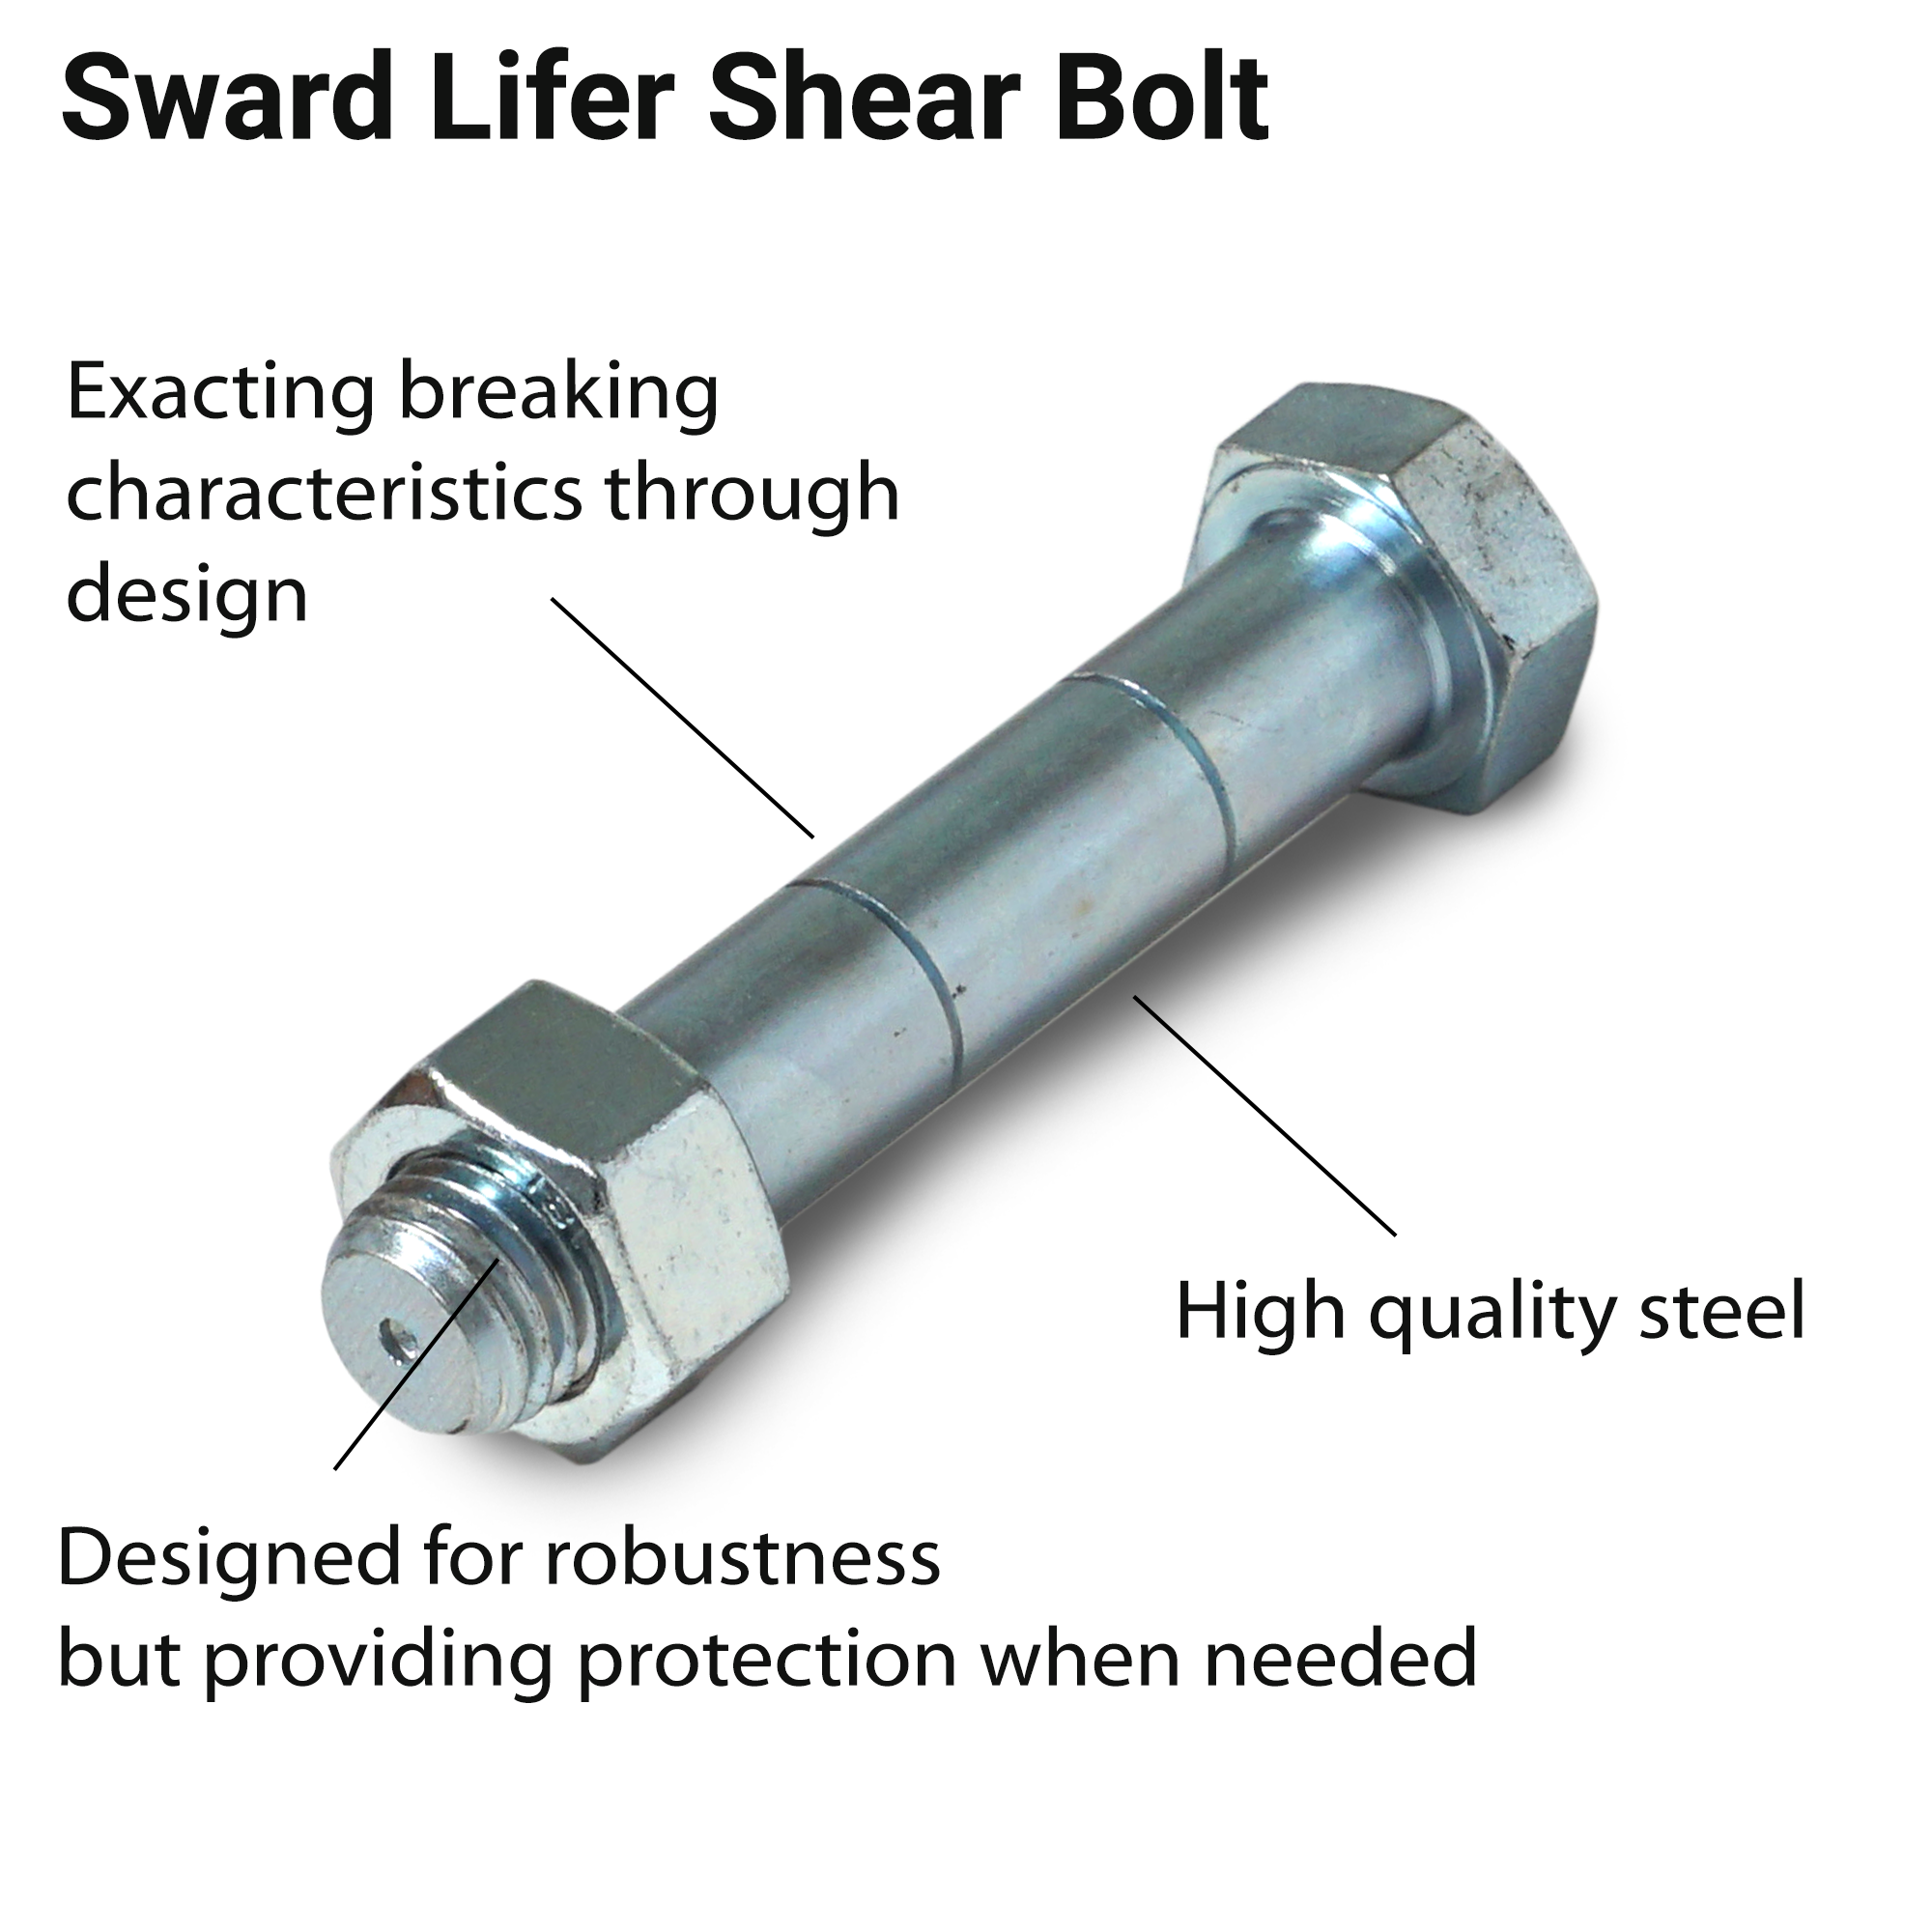 OPICO Sward Lifter Shearbolt key features